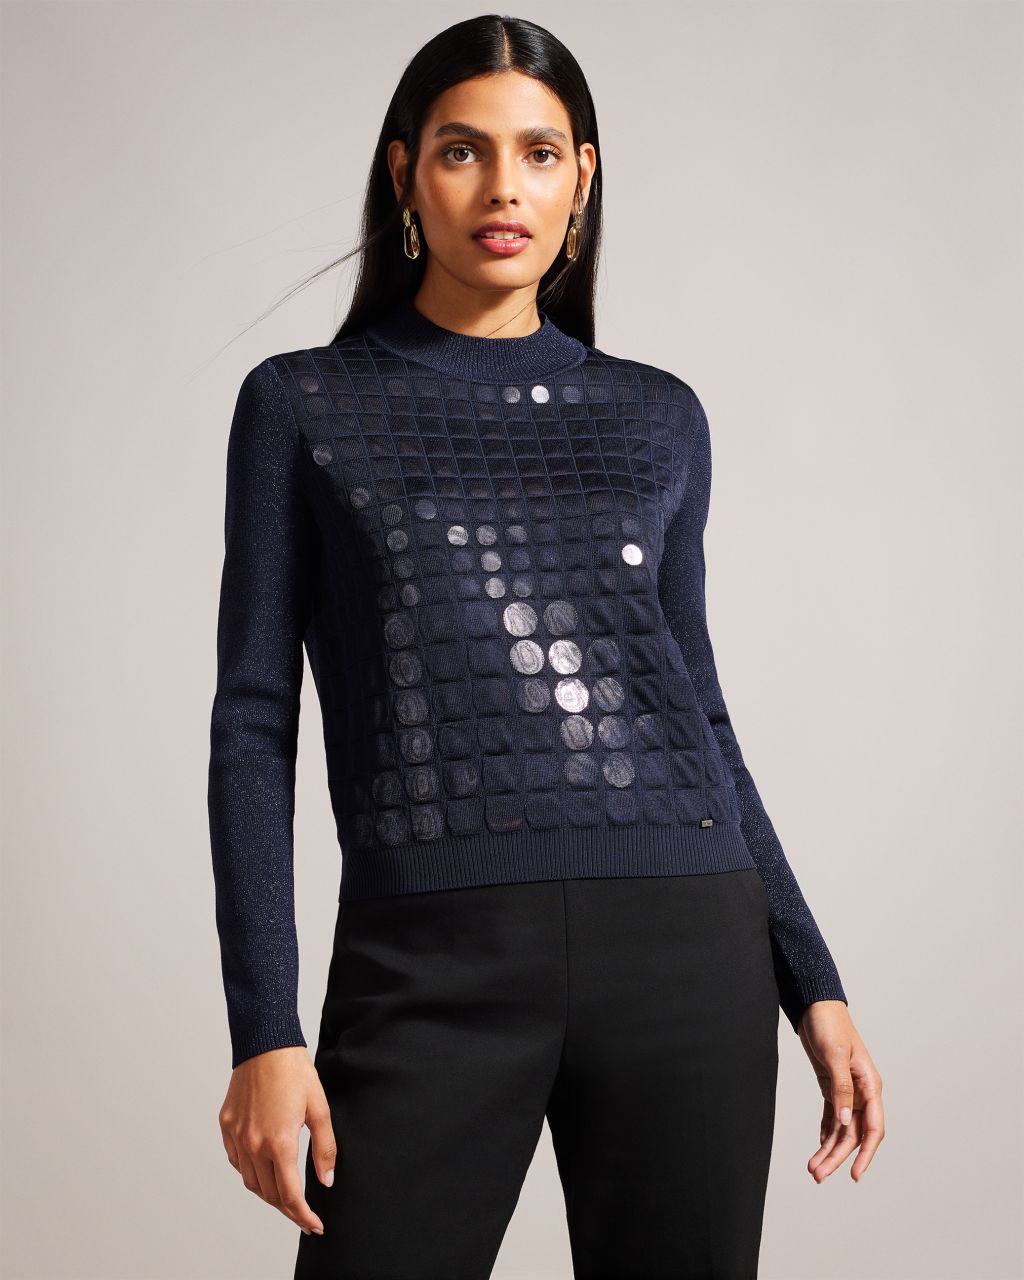 Women's Knitted Jumper With Metallic Spot Design in Blue, Yivonne product